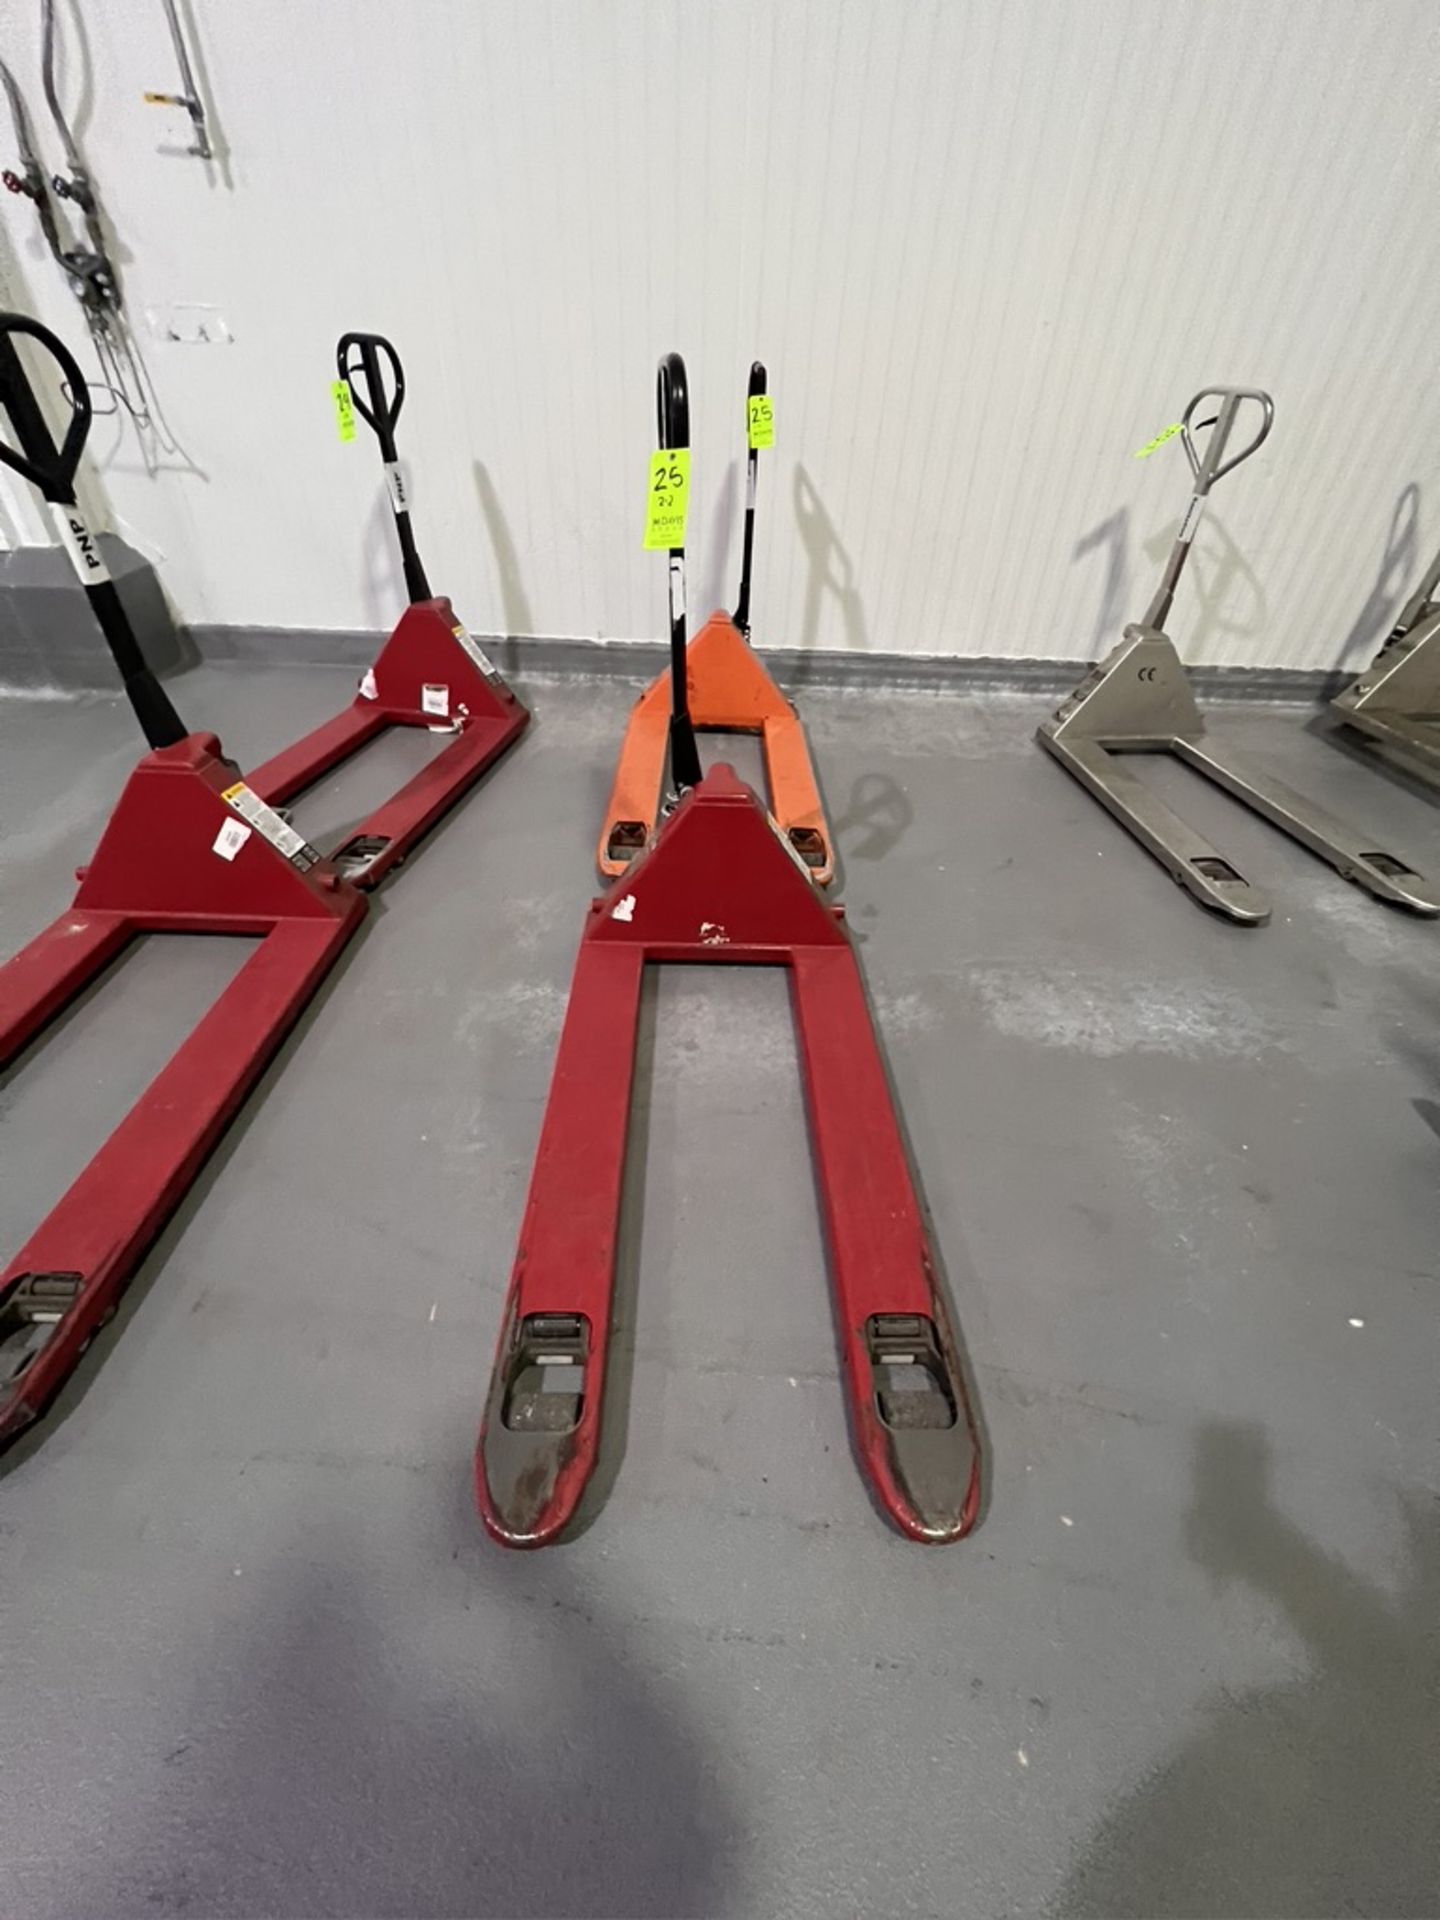 (2) ULINE PNEUMATIC PALLET JACKS (RIGGING & SIMPLE LOADING FEE $25.00) (NOTE: DOES NOT INCLUDE